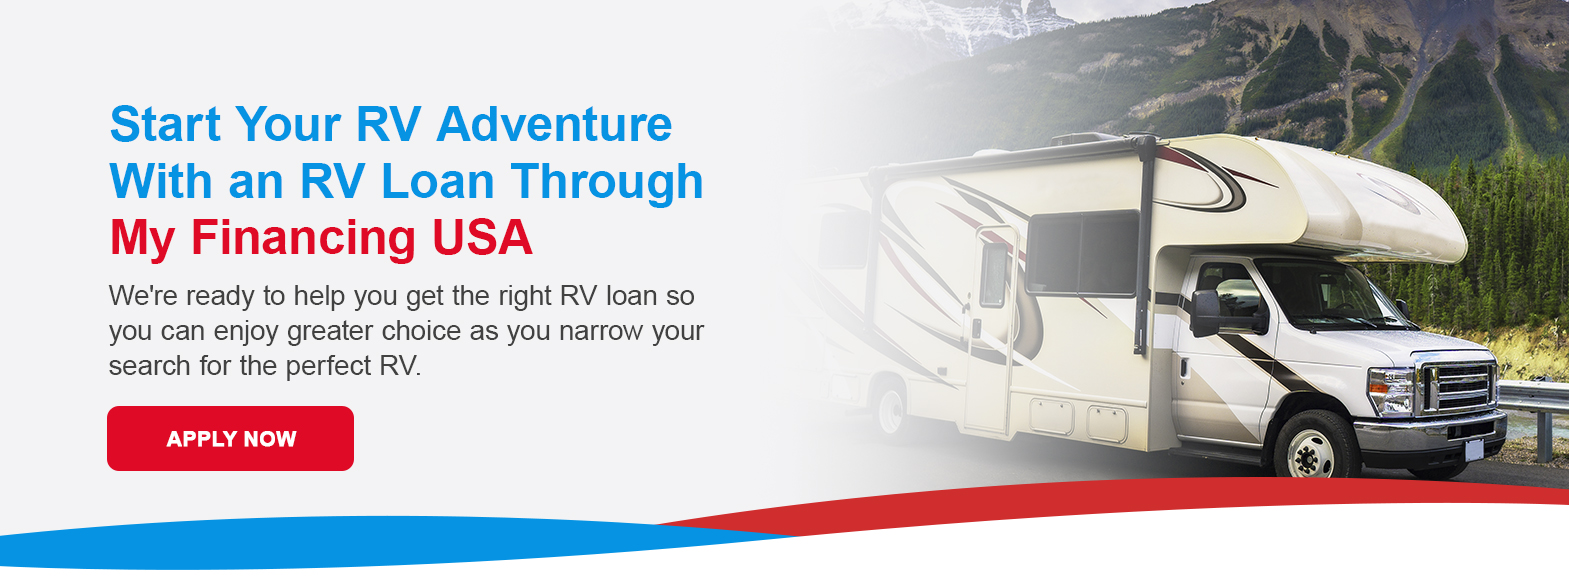 Start Your RV Adventure With an RV Loan Through My Financing USA. We're ready to help you get the right RV loan so you can enjoy greater choice as you narrow your search for the perfect RV. Apply now!